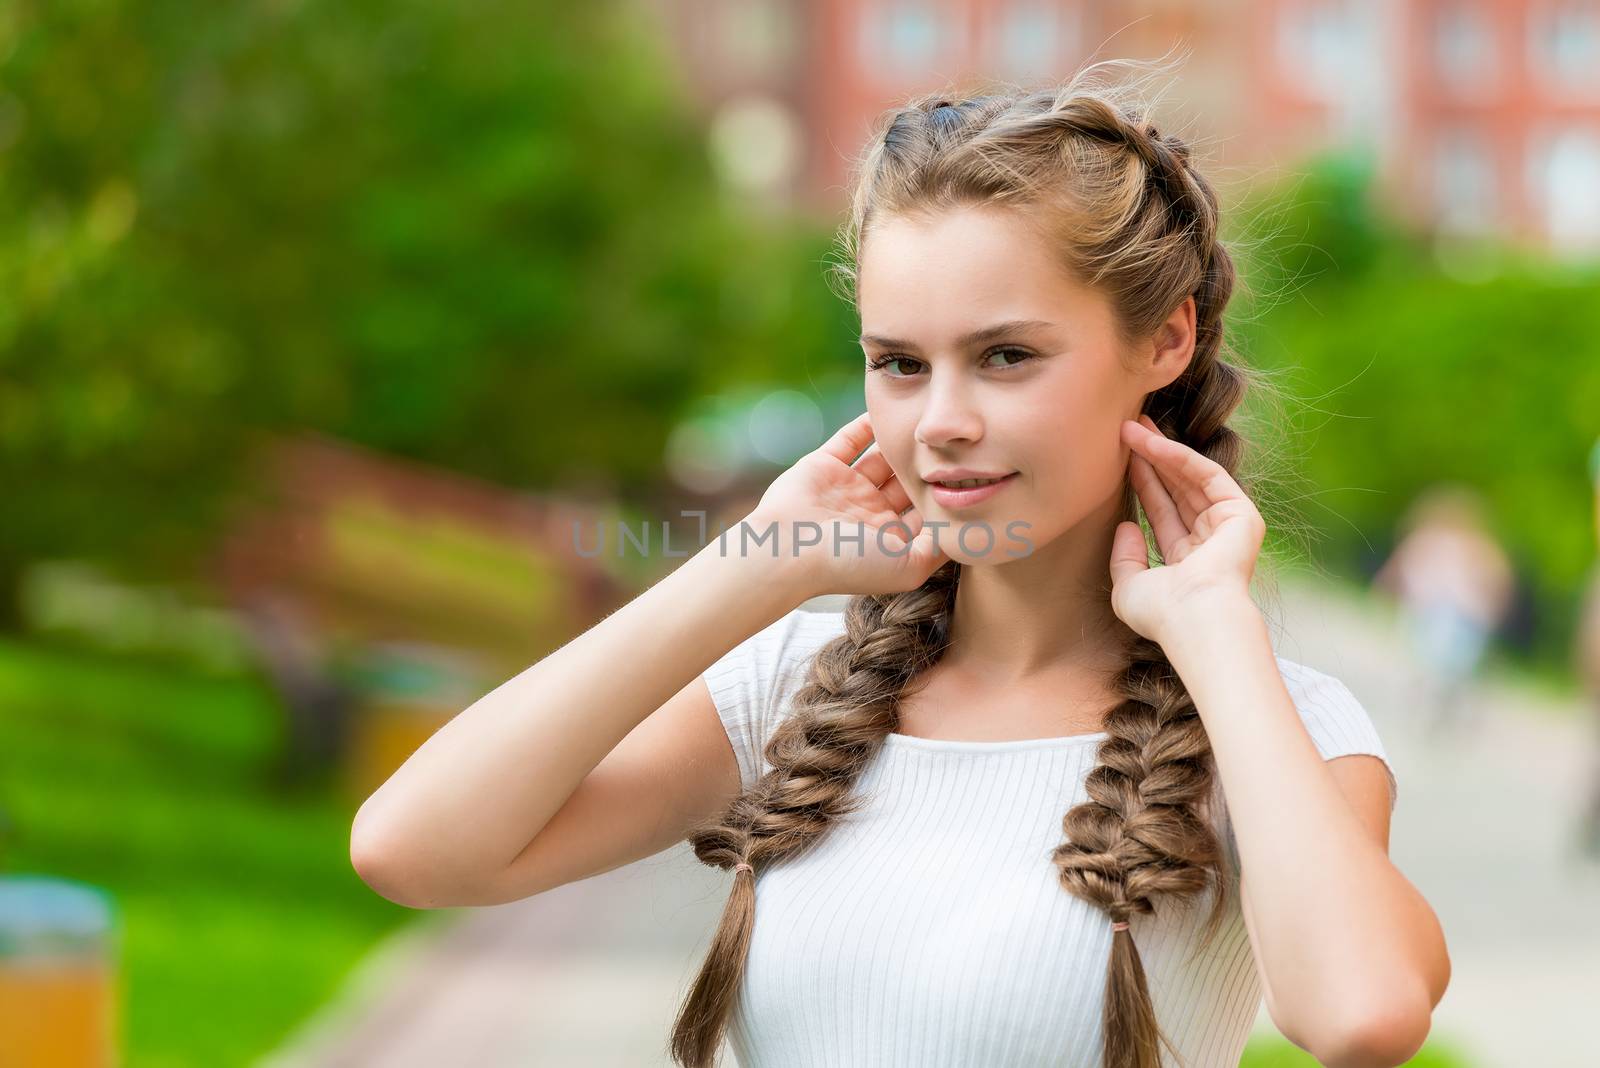 charming young woman with two braids straightens her hair, close-up portrait in the park